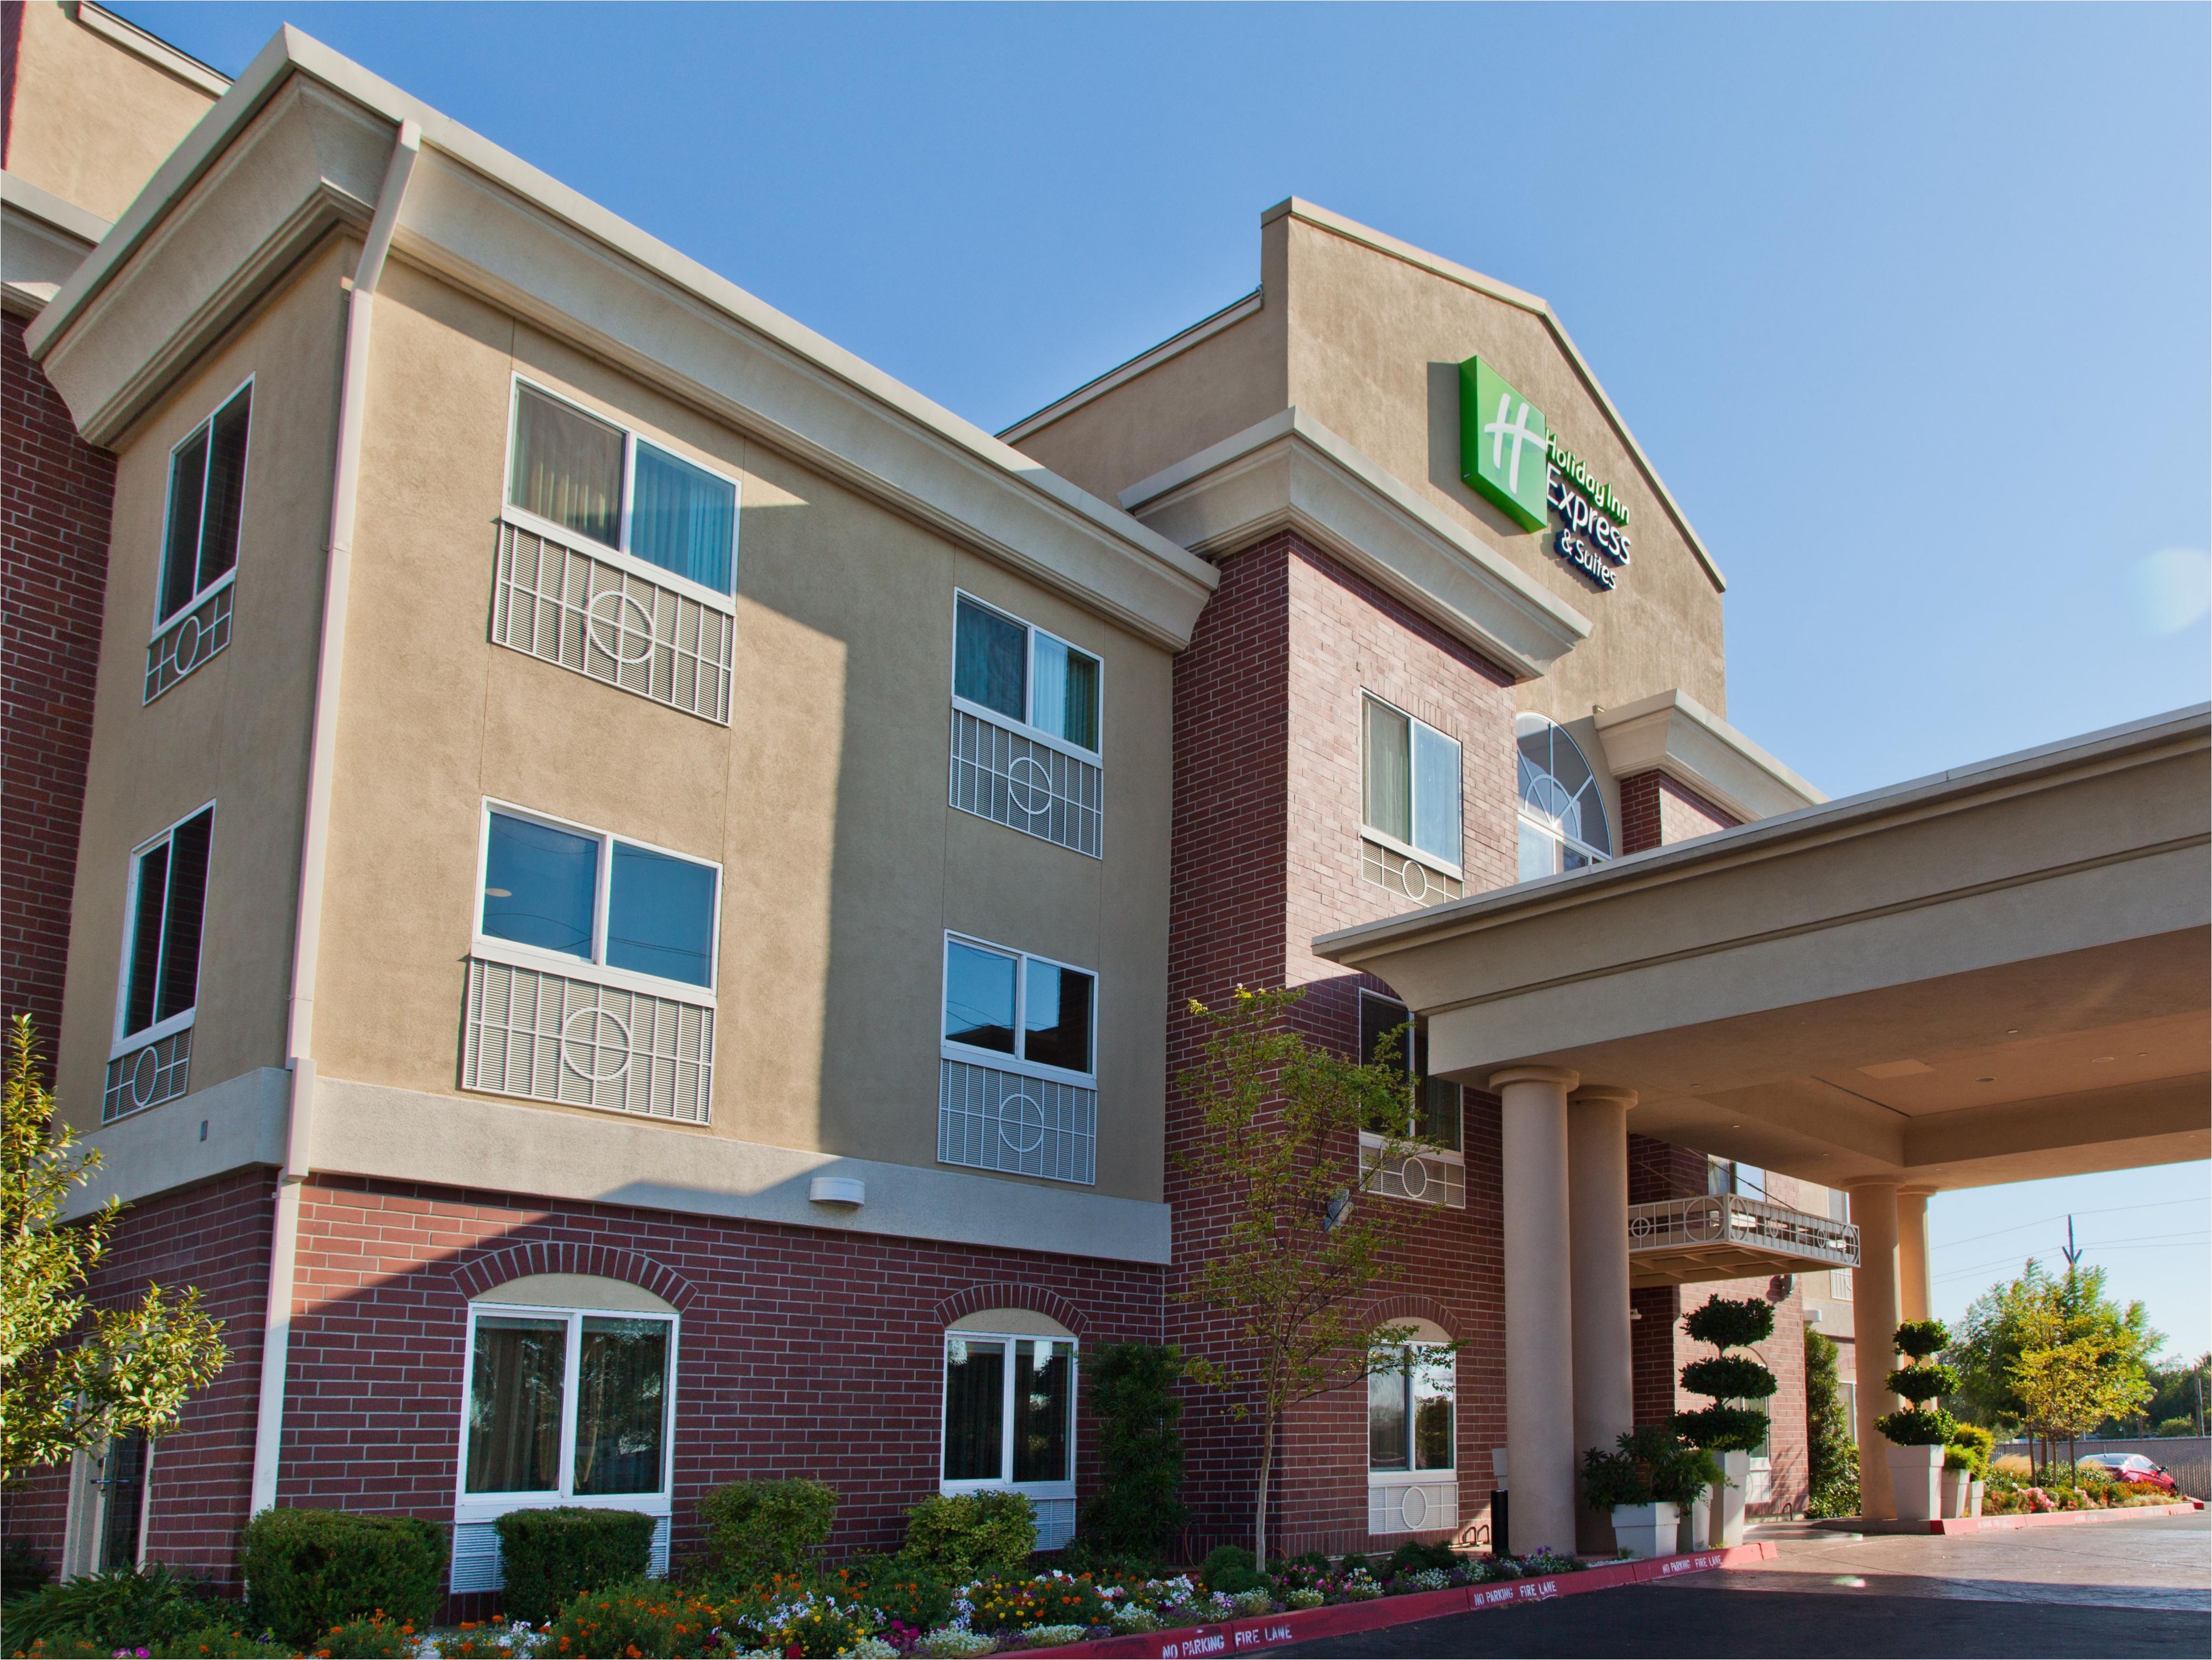 holiday inn express and suites sacramento 3109016568 4x3